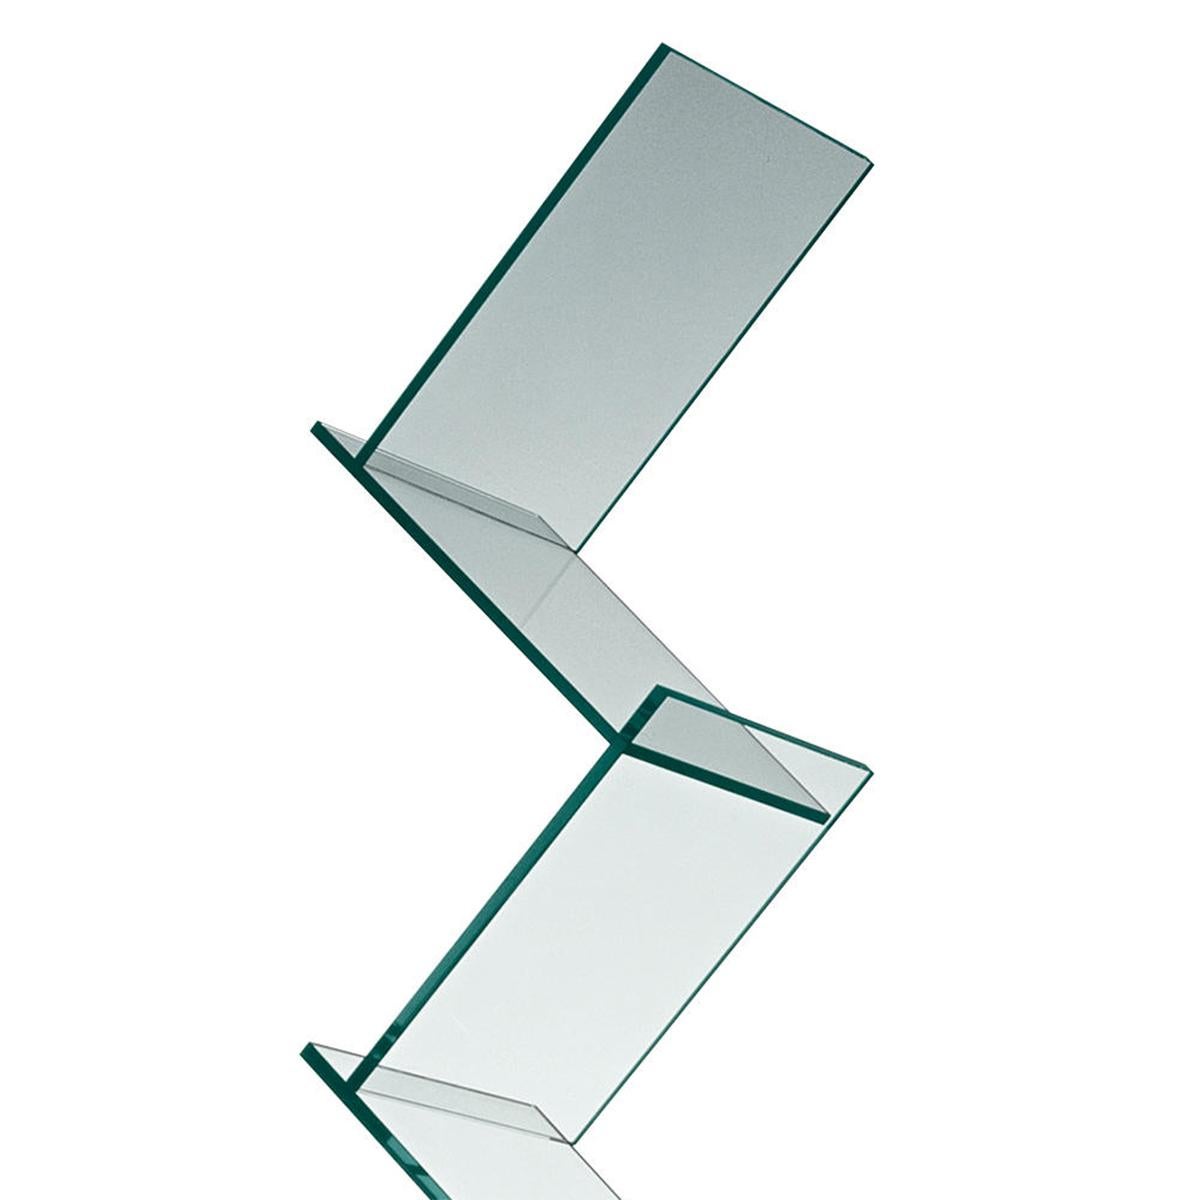 Shelf Stairs Glass with all structure in clear glass
With 6 inclined shelves. Shelf on swivel base.